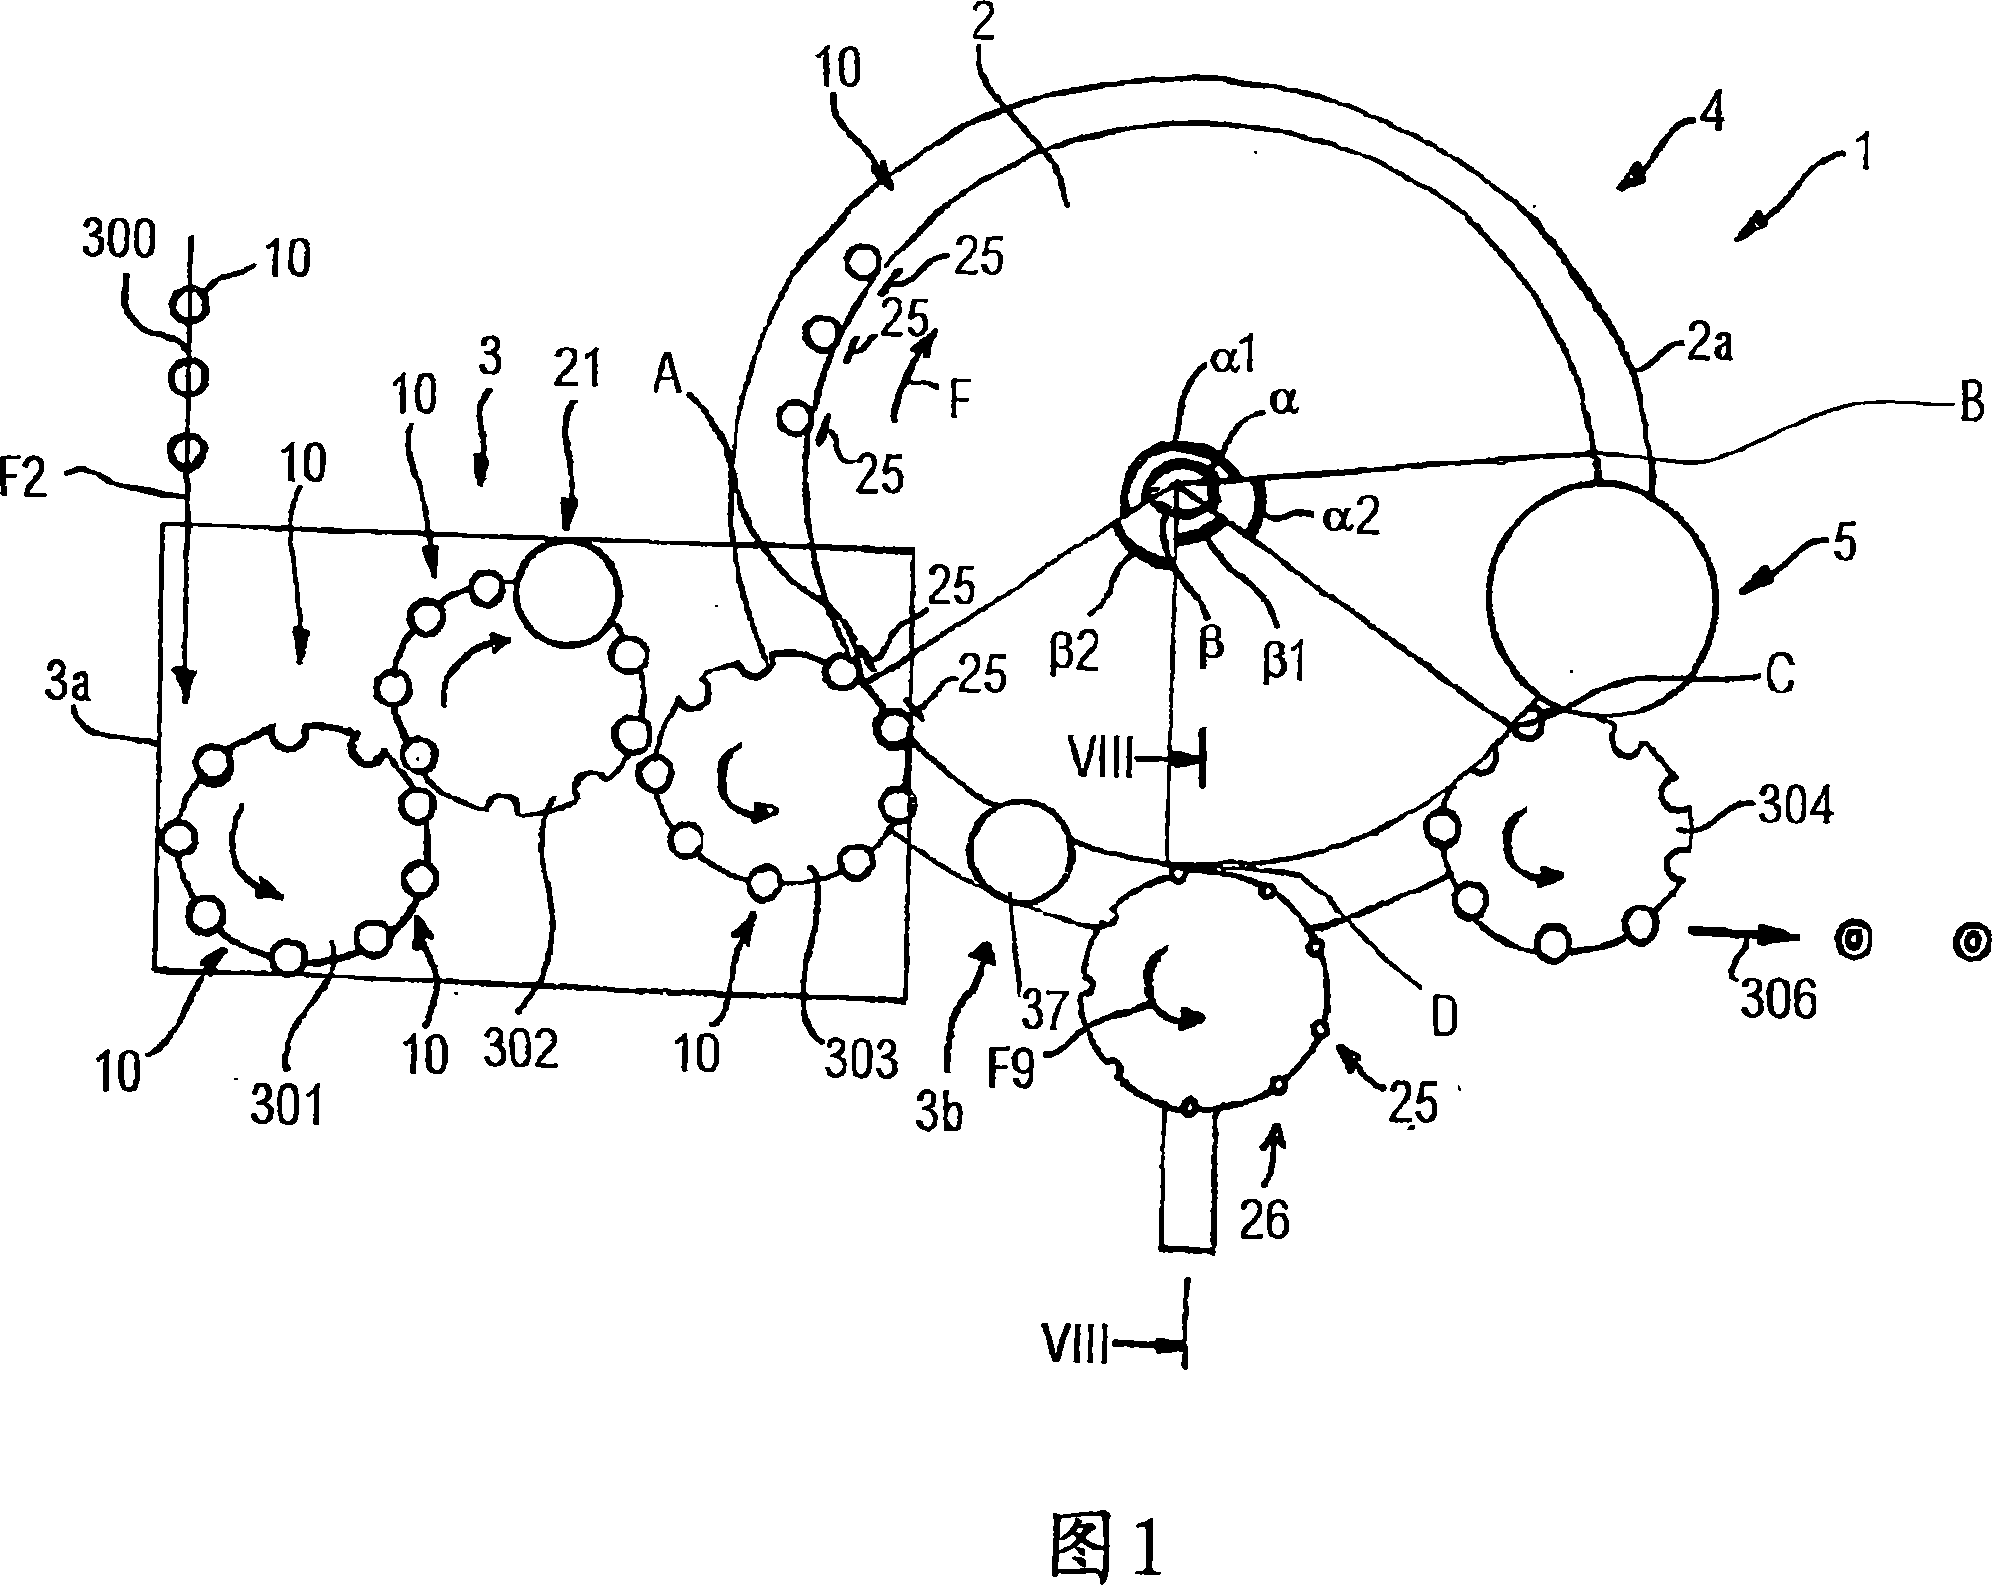 Apparatuses and methods for sterilising and filling components of packaging units, particularly bottles and/or caps